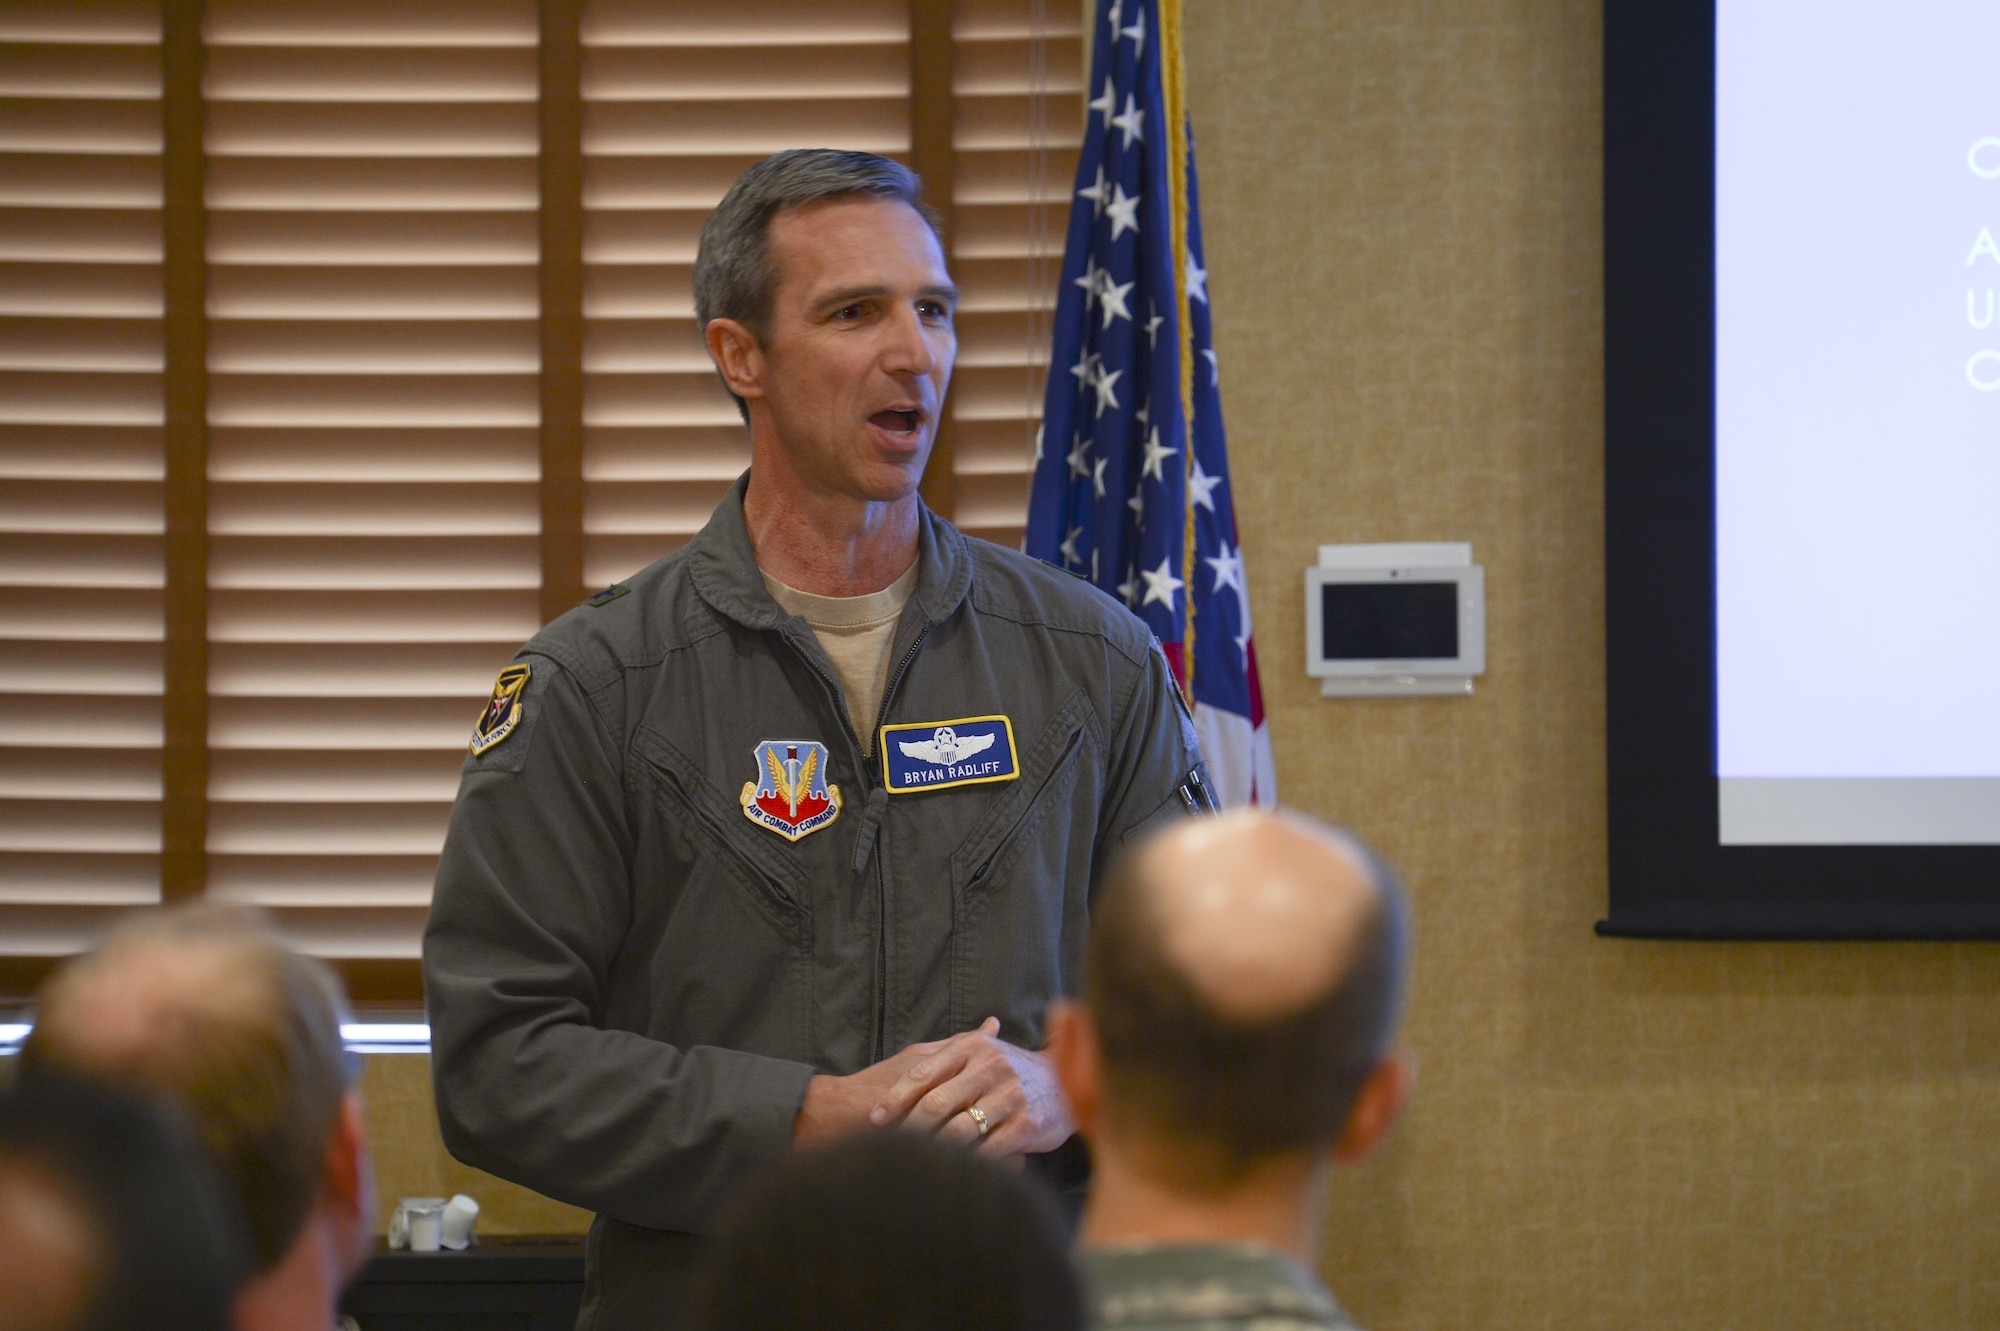 Brig. Gen. Bryan Radliff, 12th Air Force (Air Forces Southern) mobilization assistant to the commander, gives opening remarks during a speaker series event at Davis-Monthan Air Force Base, Ariz., June 19, 2017, for the 12th Air Force (Air Forces Southern) Academic Outreach Program with the University of Arizona. The intent of the speaker series is to facilitate the exchange ideas between government and academic institutions while fostering collaborative discussions about global issues. (U.S. Air Force photo by Staff Sgt. Angela Ruiz)